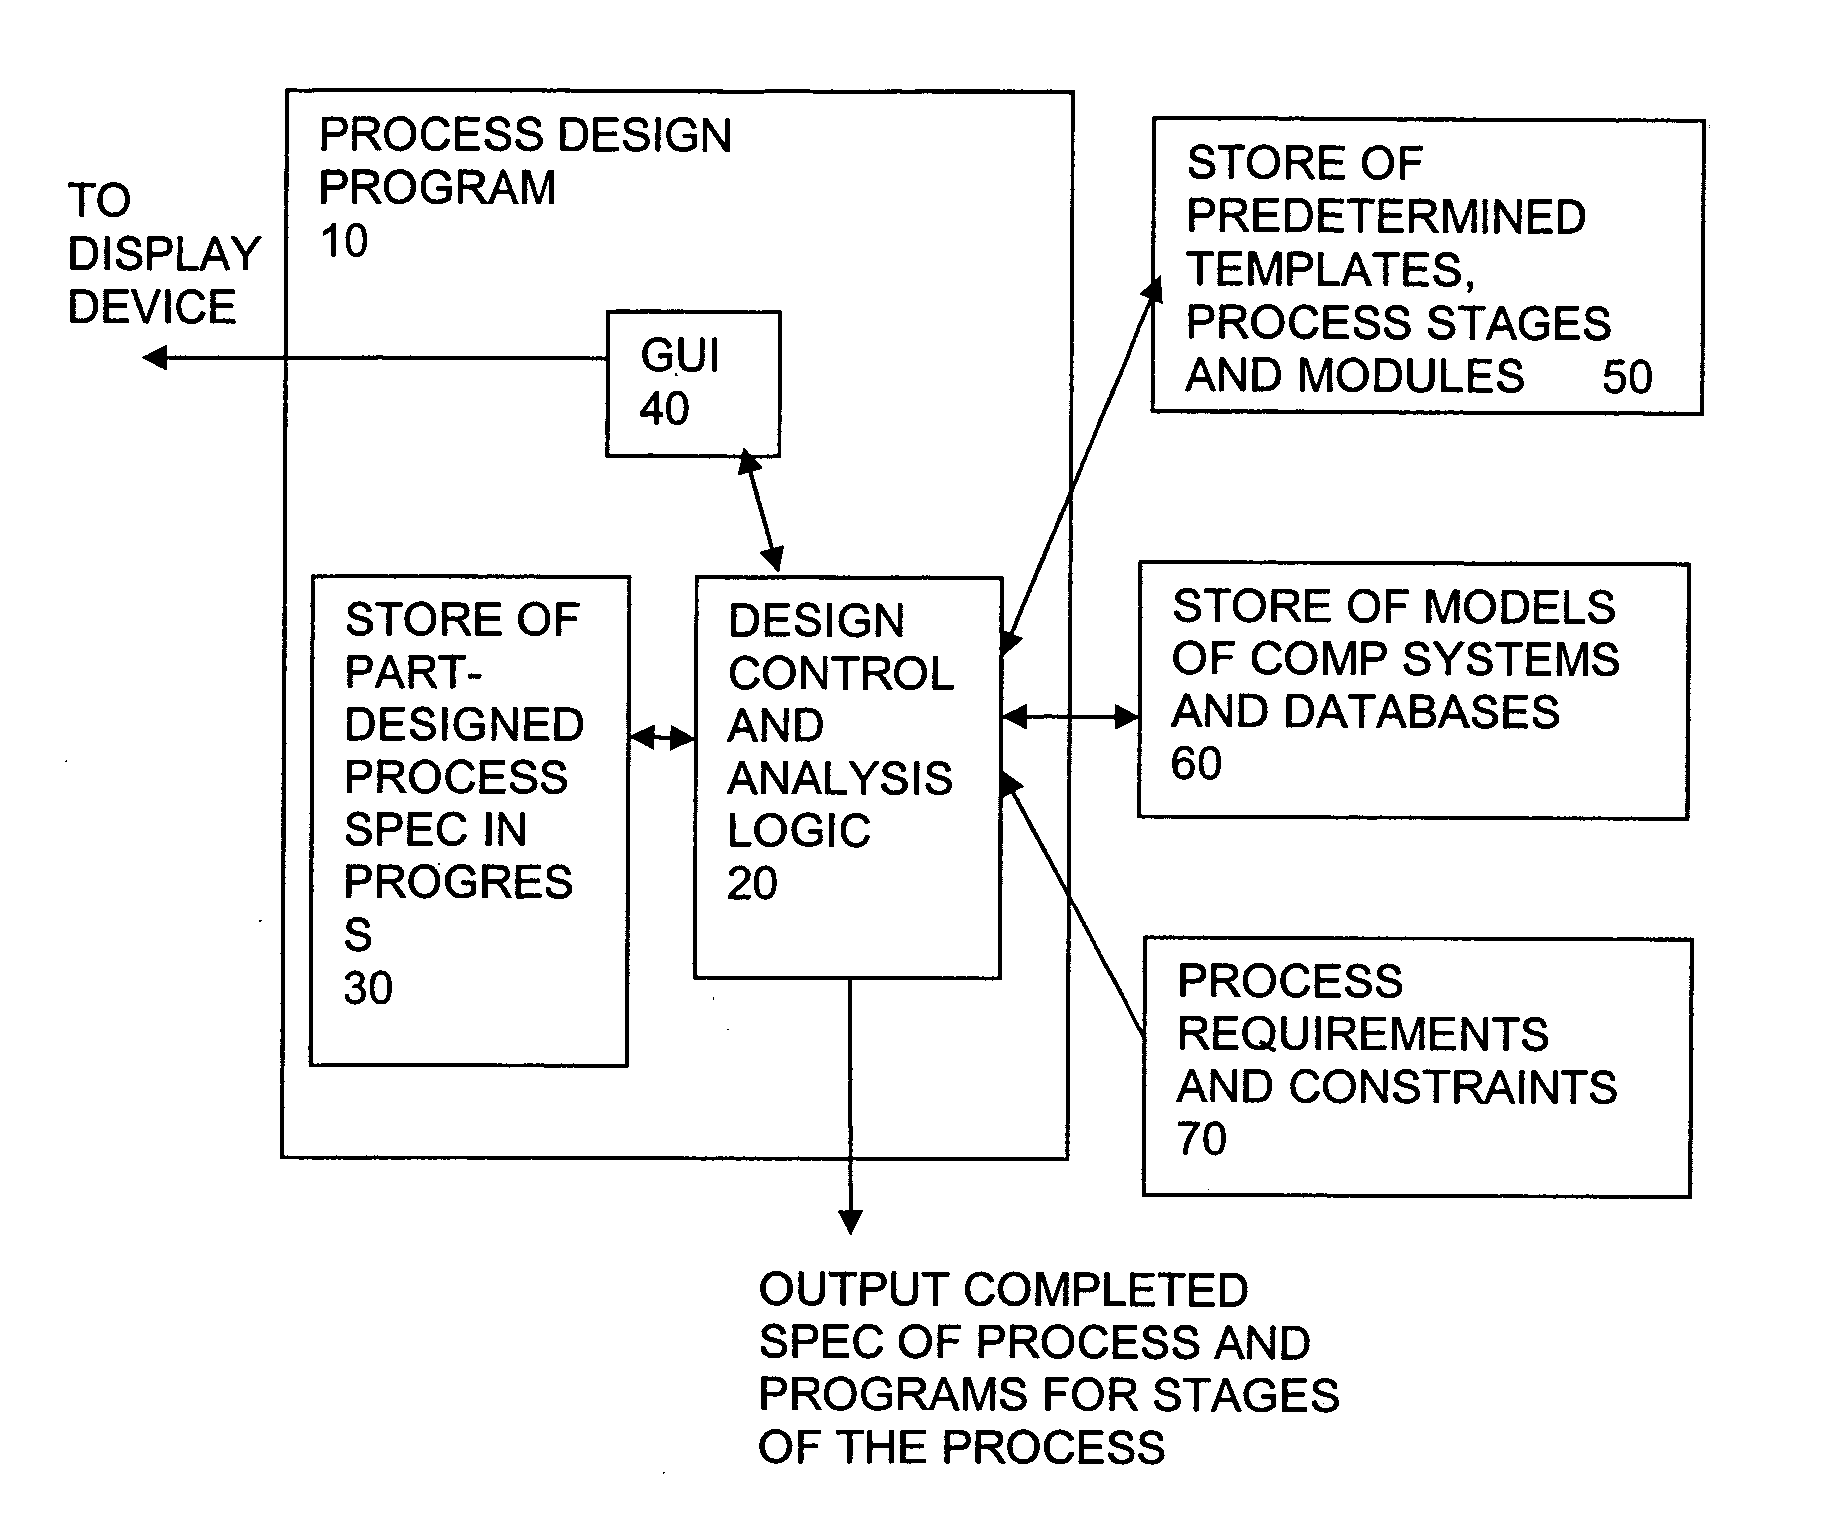 Inferring data type in a multi stage process